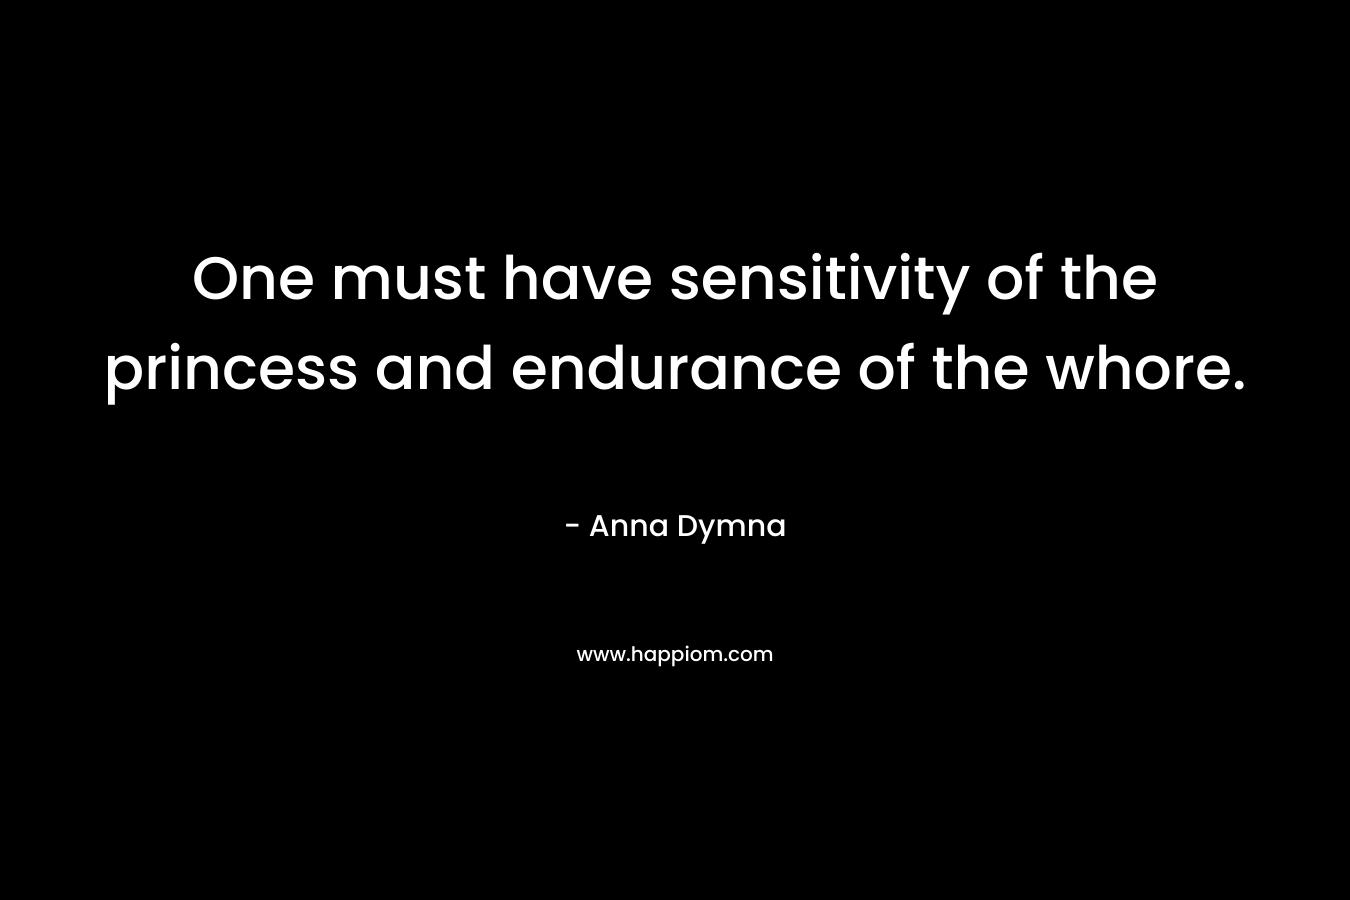 One must have sensitivity of the princess and endurance of the whore. – Anna Dymna